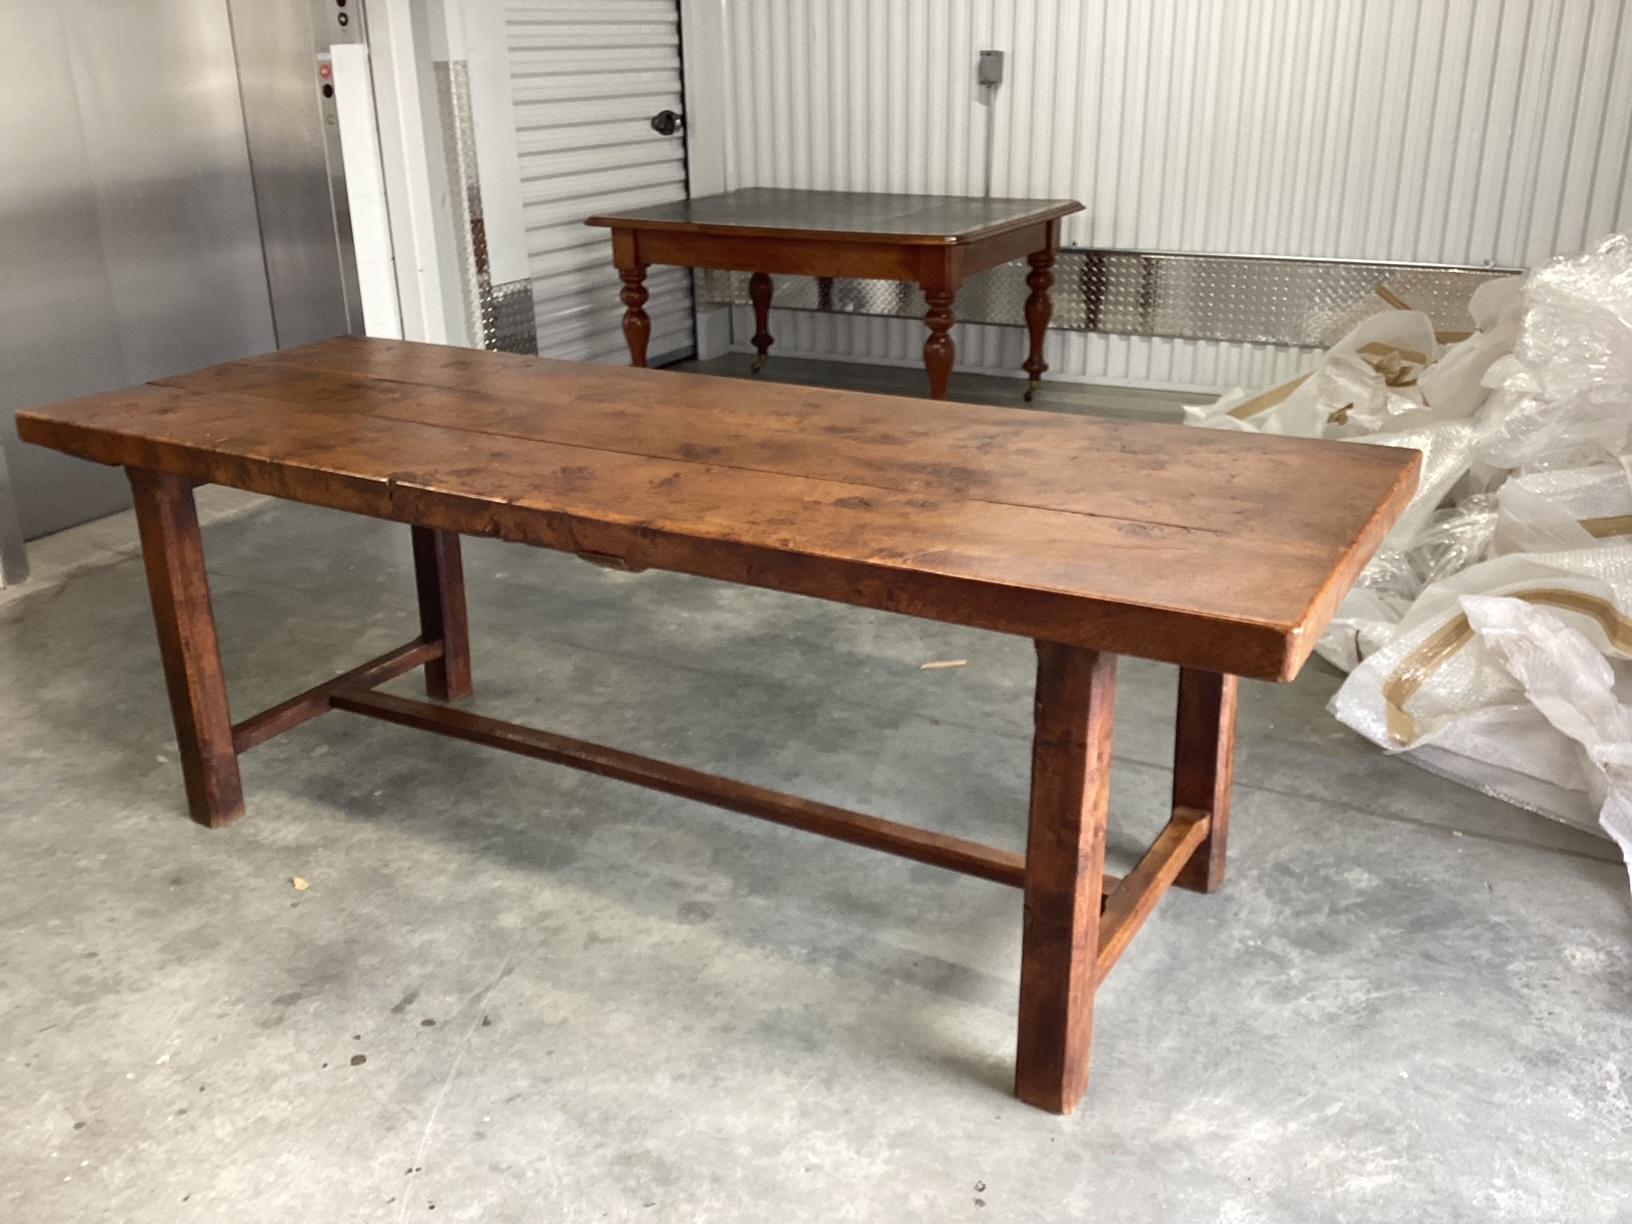 Purchased in Normandy, France, this 19th century farm table has amazing character with knotted elm wood, warm diverse colors and authentic signs of age. Massive full wood boards make up the top that rests on 4 simple straight legs and a cross